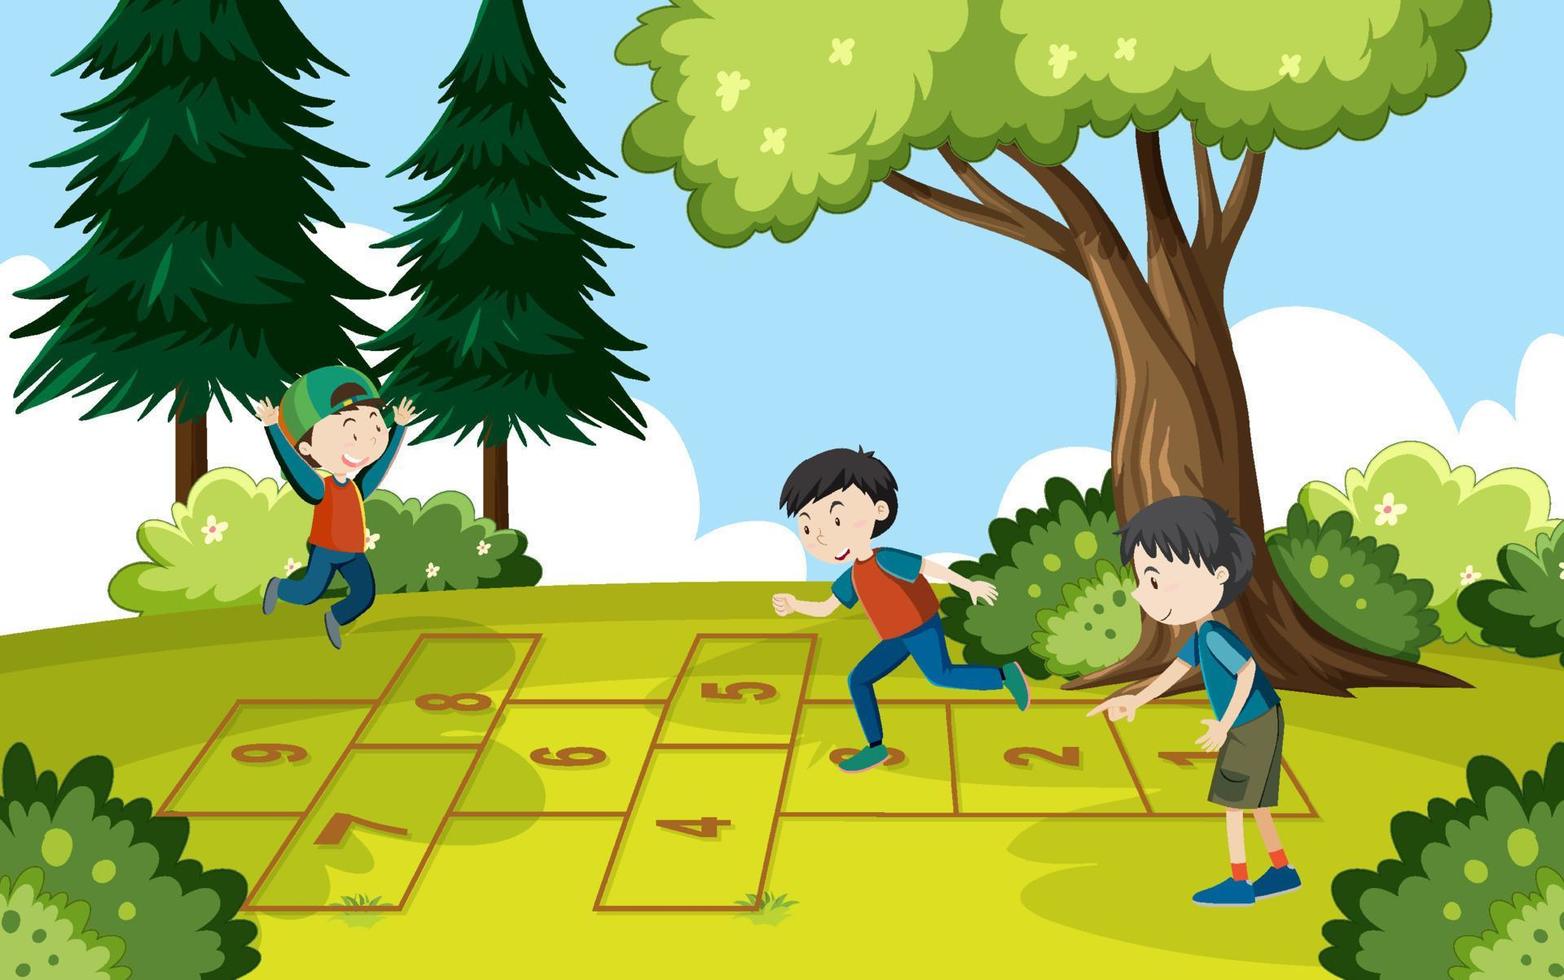 Children playing hopscotch game at the park vector